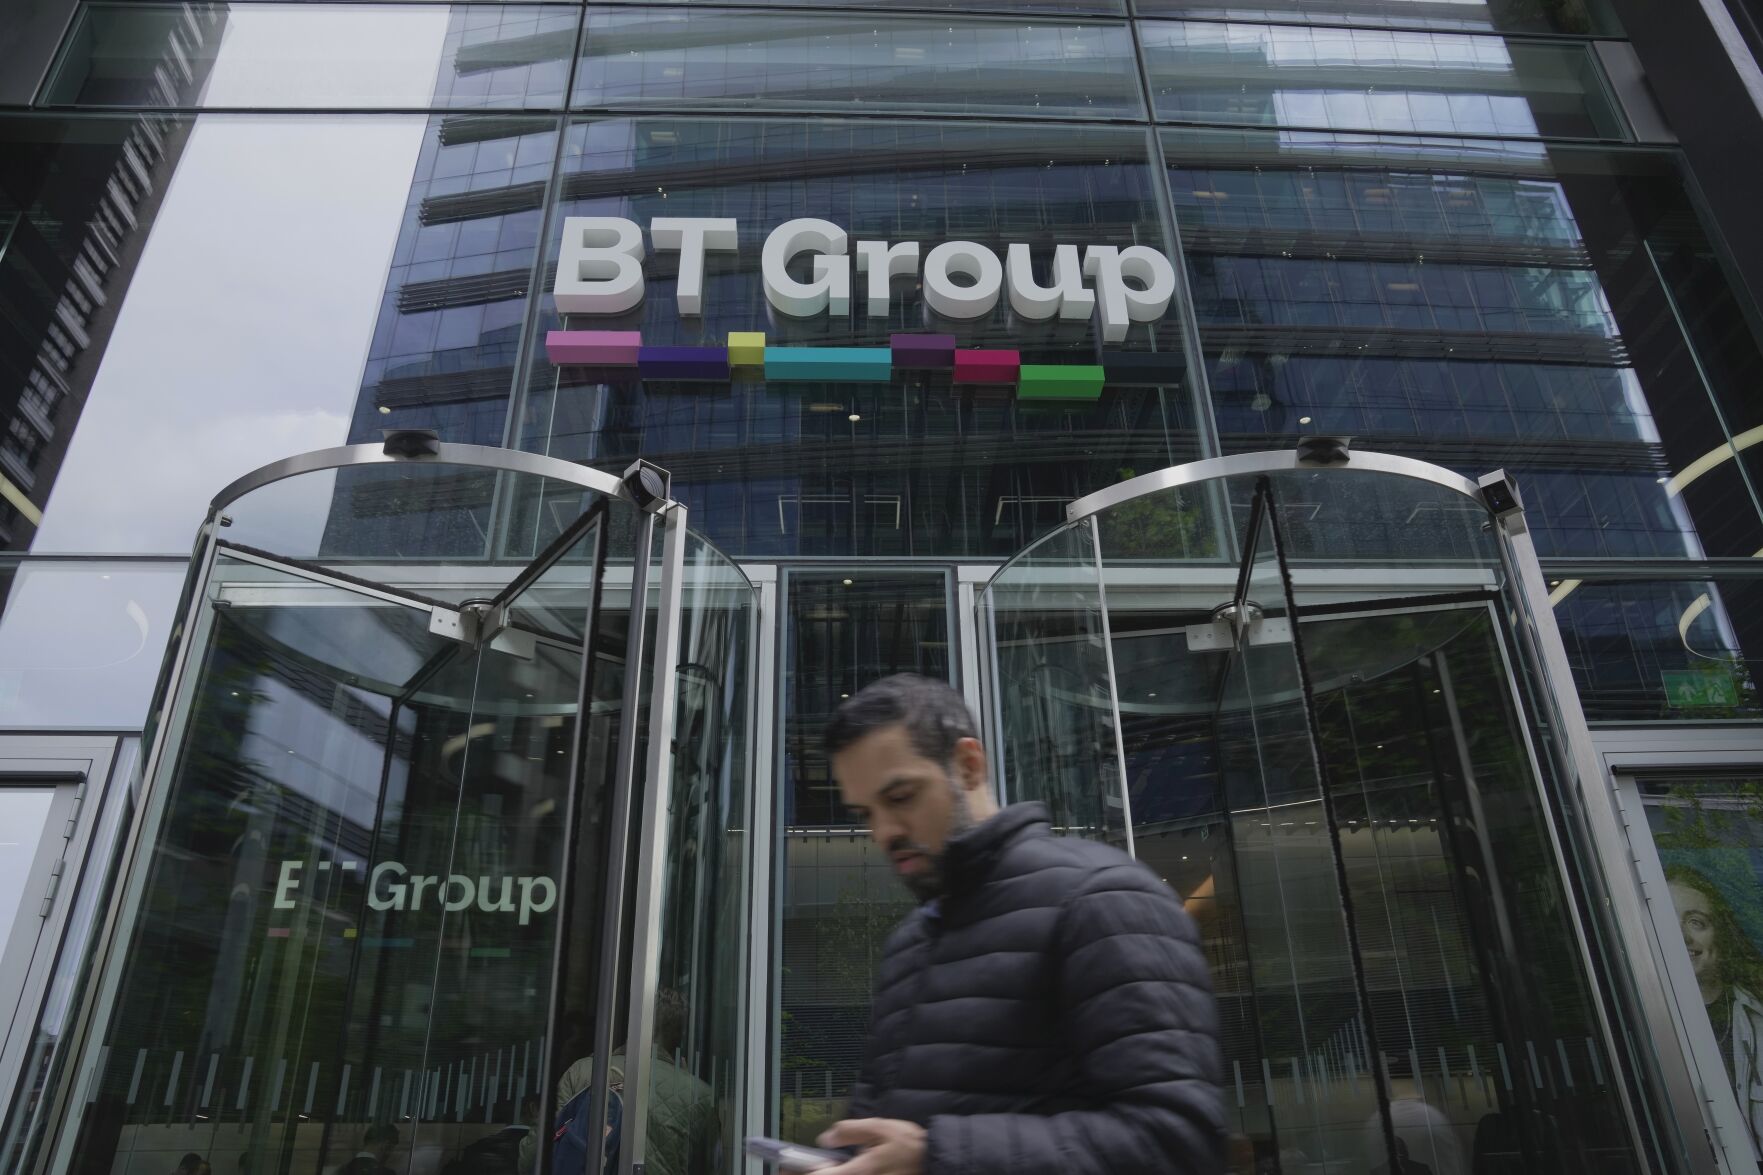 <p>A man walks in front of the BT headquarters, in London, Thursday, May 18, 2023. U.K. telecom company BT Group said Thursday that it plans to shed up to 55,000 jobs by the end of the decade as part of an overhaul aimed at slimming down its workforce to slash costs. (AP Photo/Kin Cheung)</p>   PHOTO CREDIT: Kin Cheung